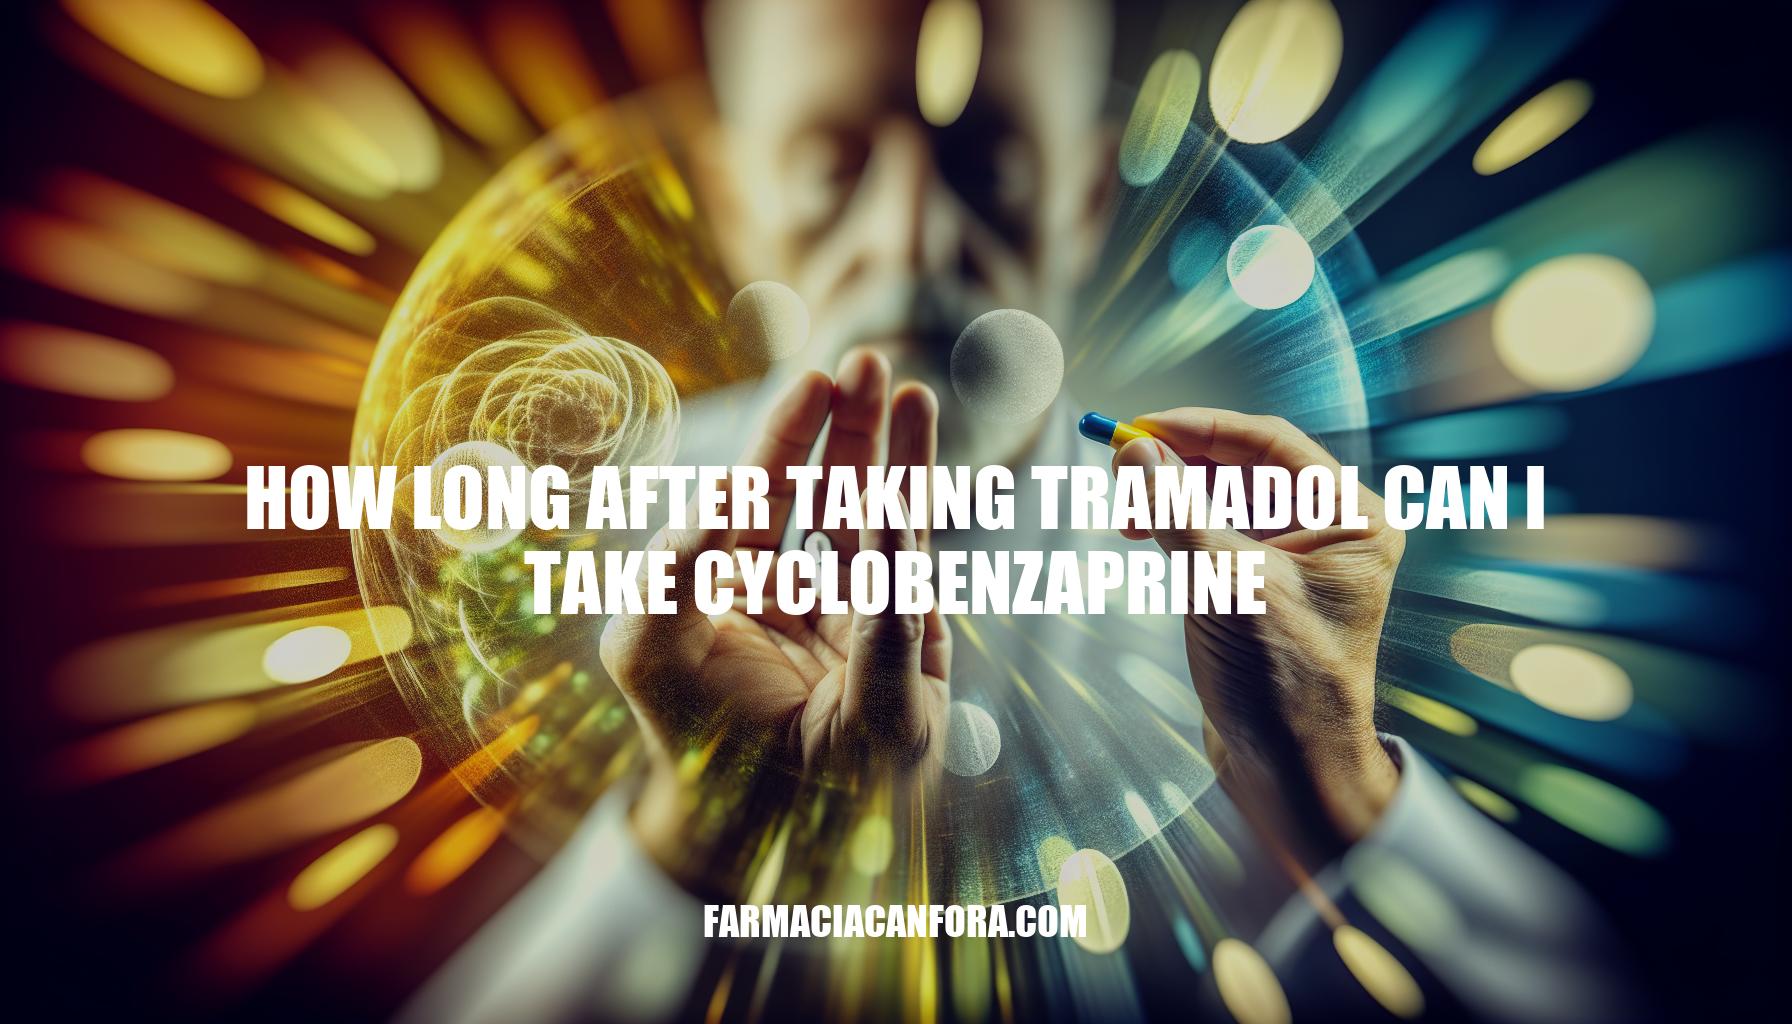 How Long After Taking Tramadol Can I Take Cyclobenzaprine